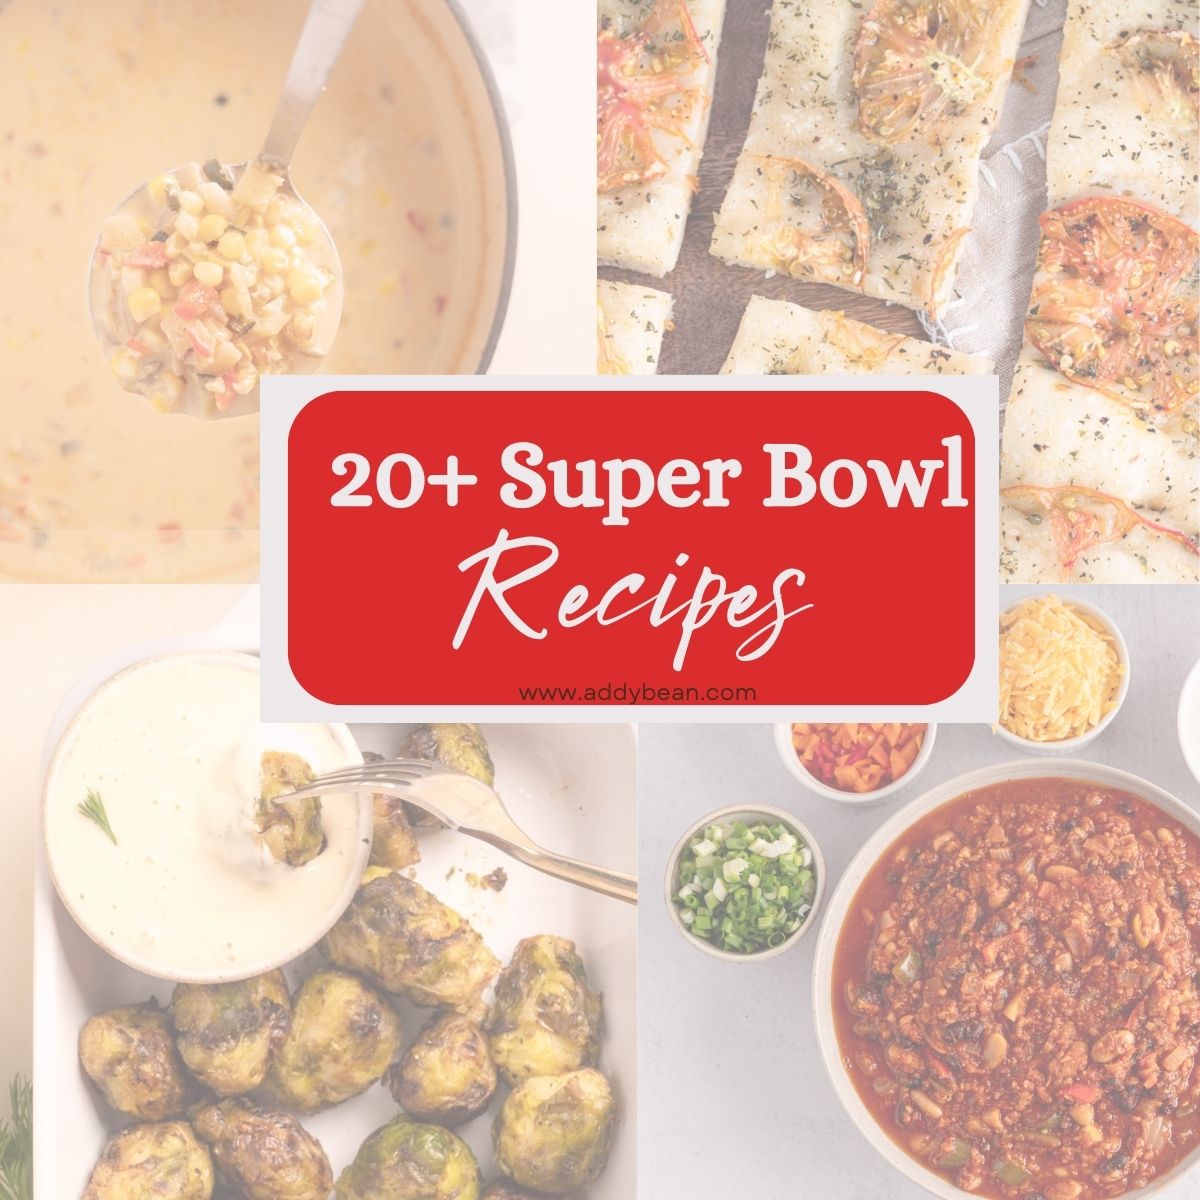 Four images of transparent super bowl dishes including a corn chowder, foccacia, air fryer brussel sprouts with a cream horseradish dip, and a veggie chili